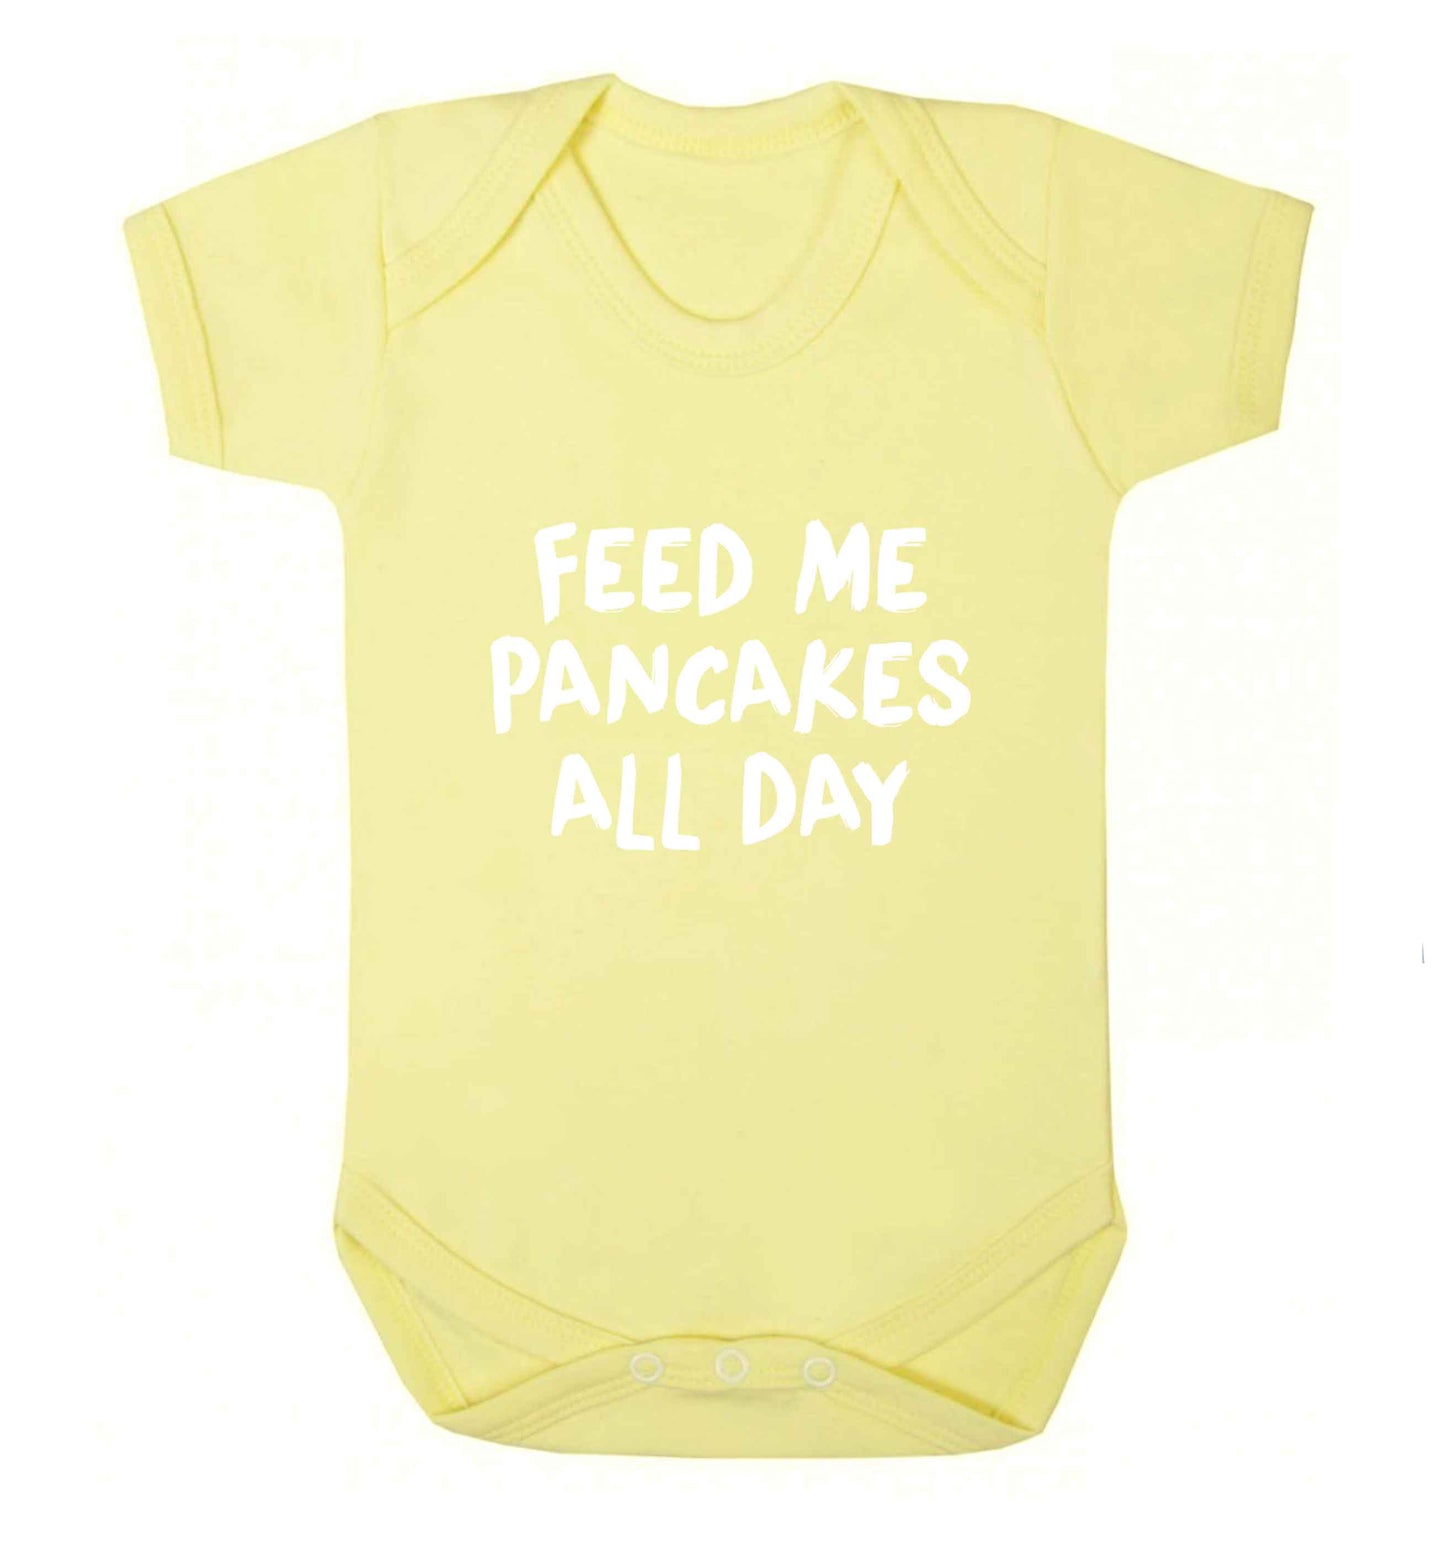 Feed me pancakes all day baby vest pale yellow 18-24 months